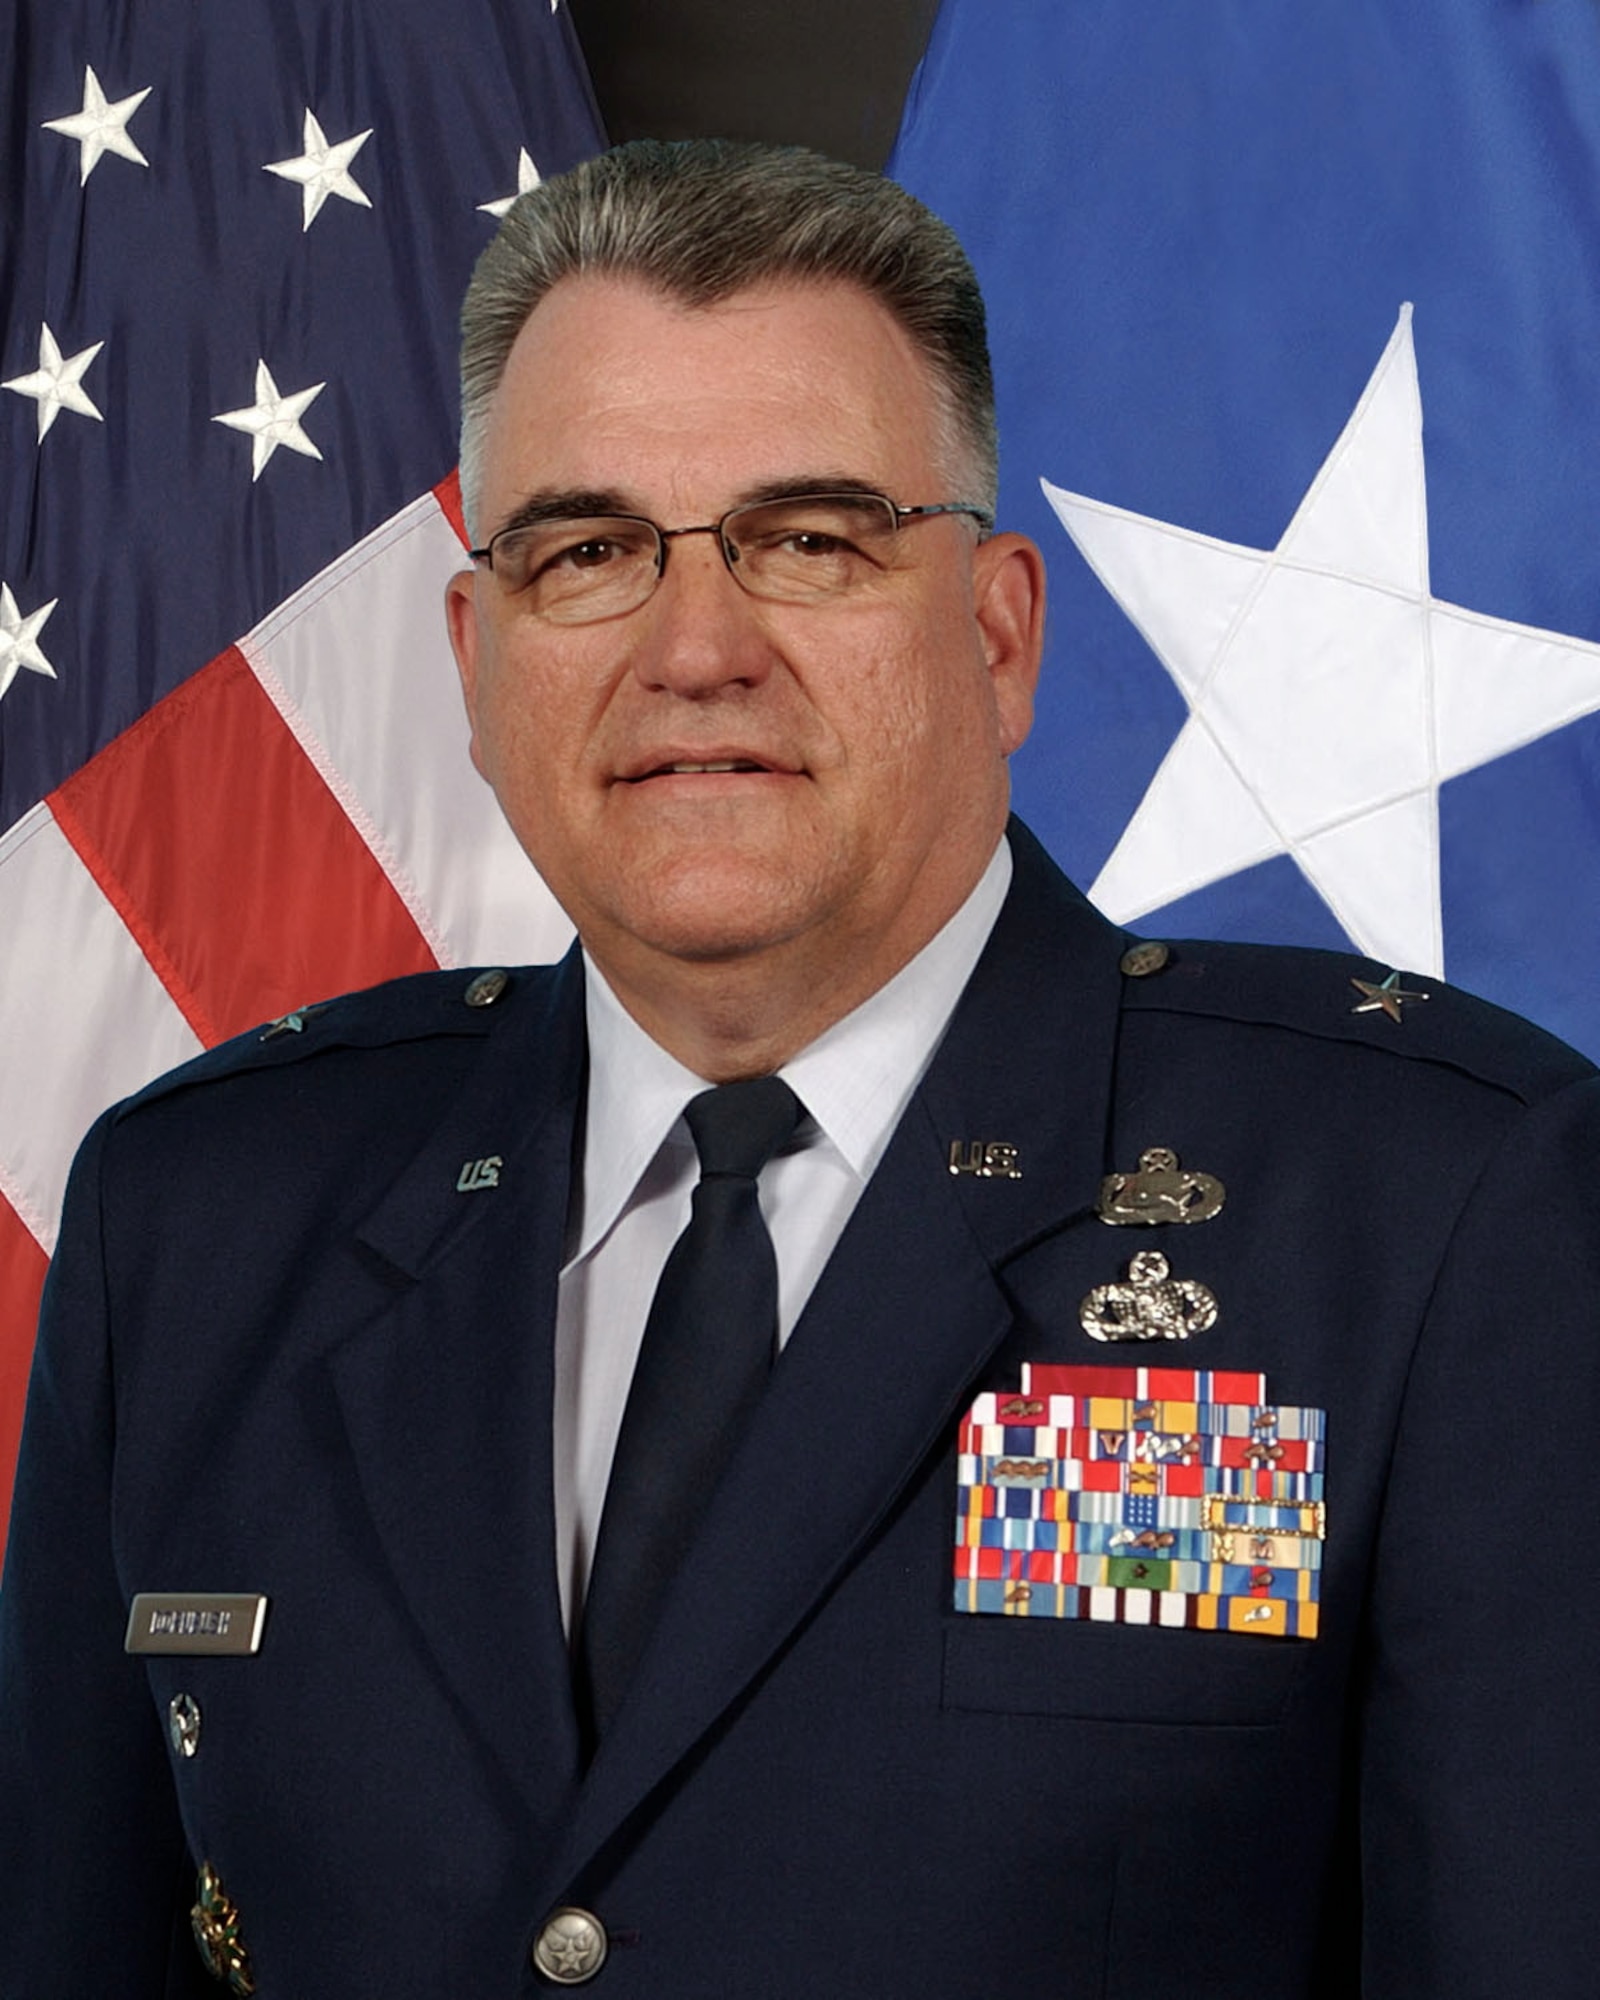 Brig. Gen. Michael Dornbush will assume the duties of assistant adjutant general for Air, taking over for Brig. Gen. Howard P. Hunt III, who retired from the Kentucky National Guard on Tuesday.